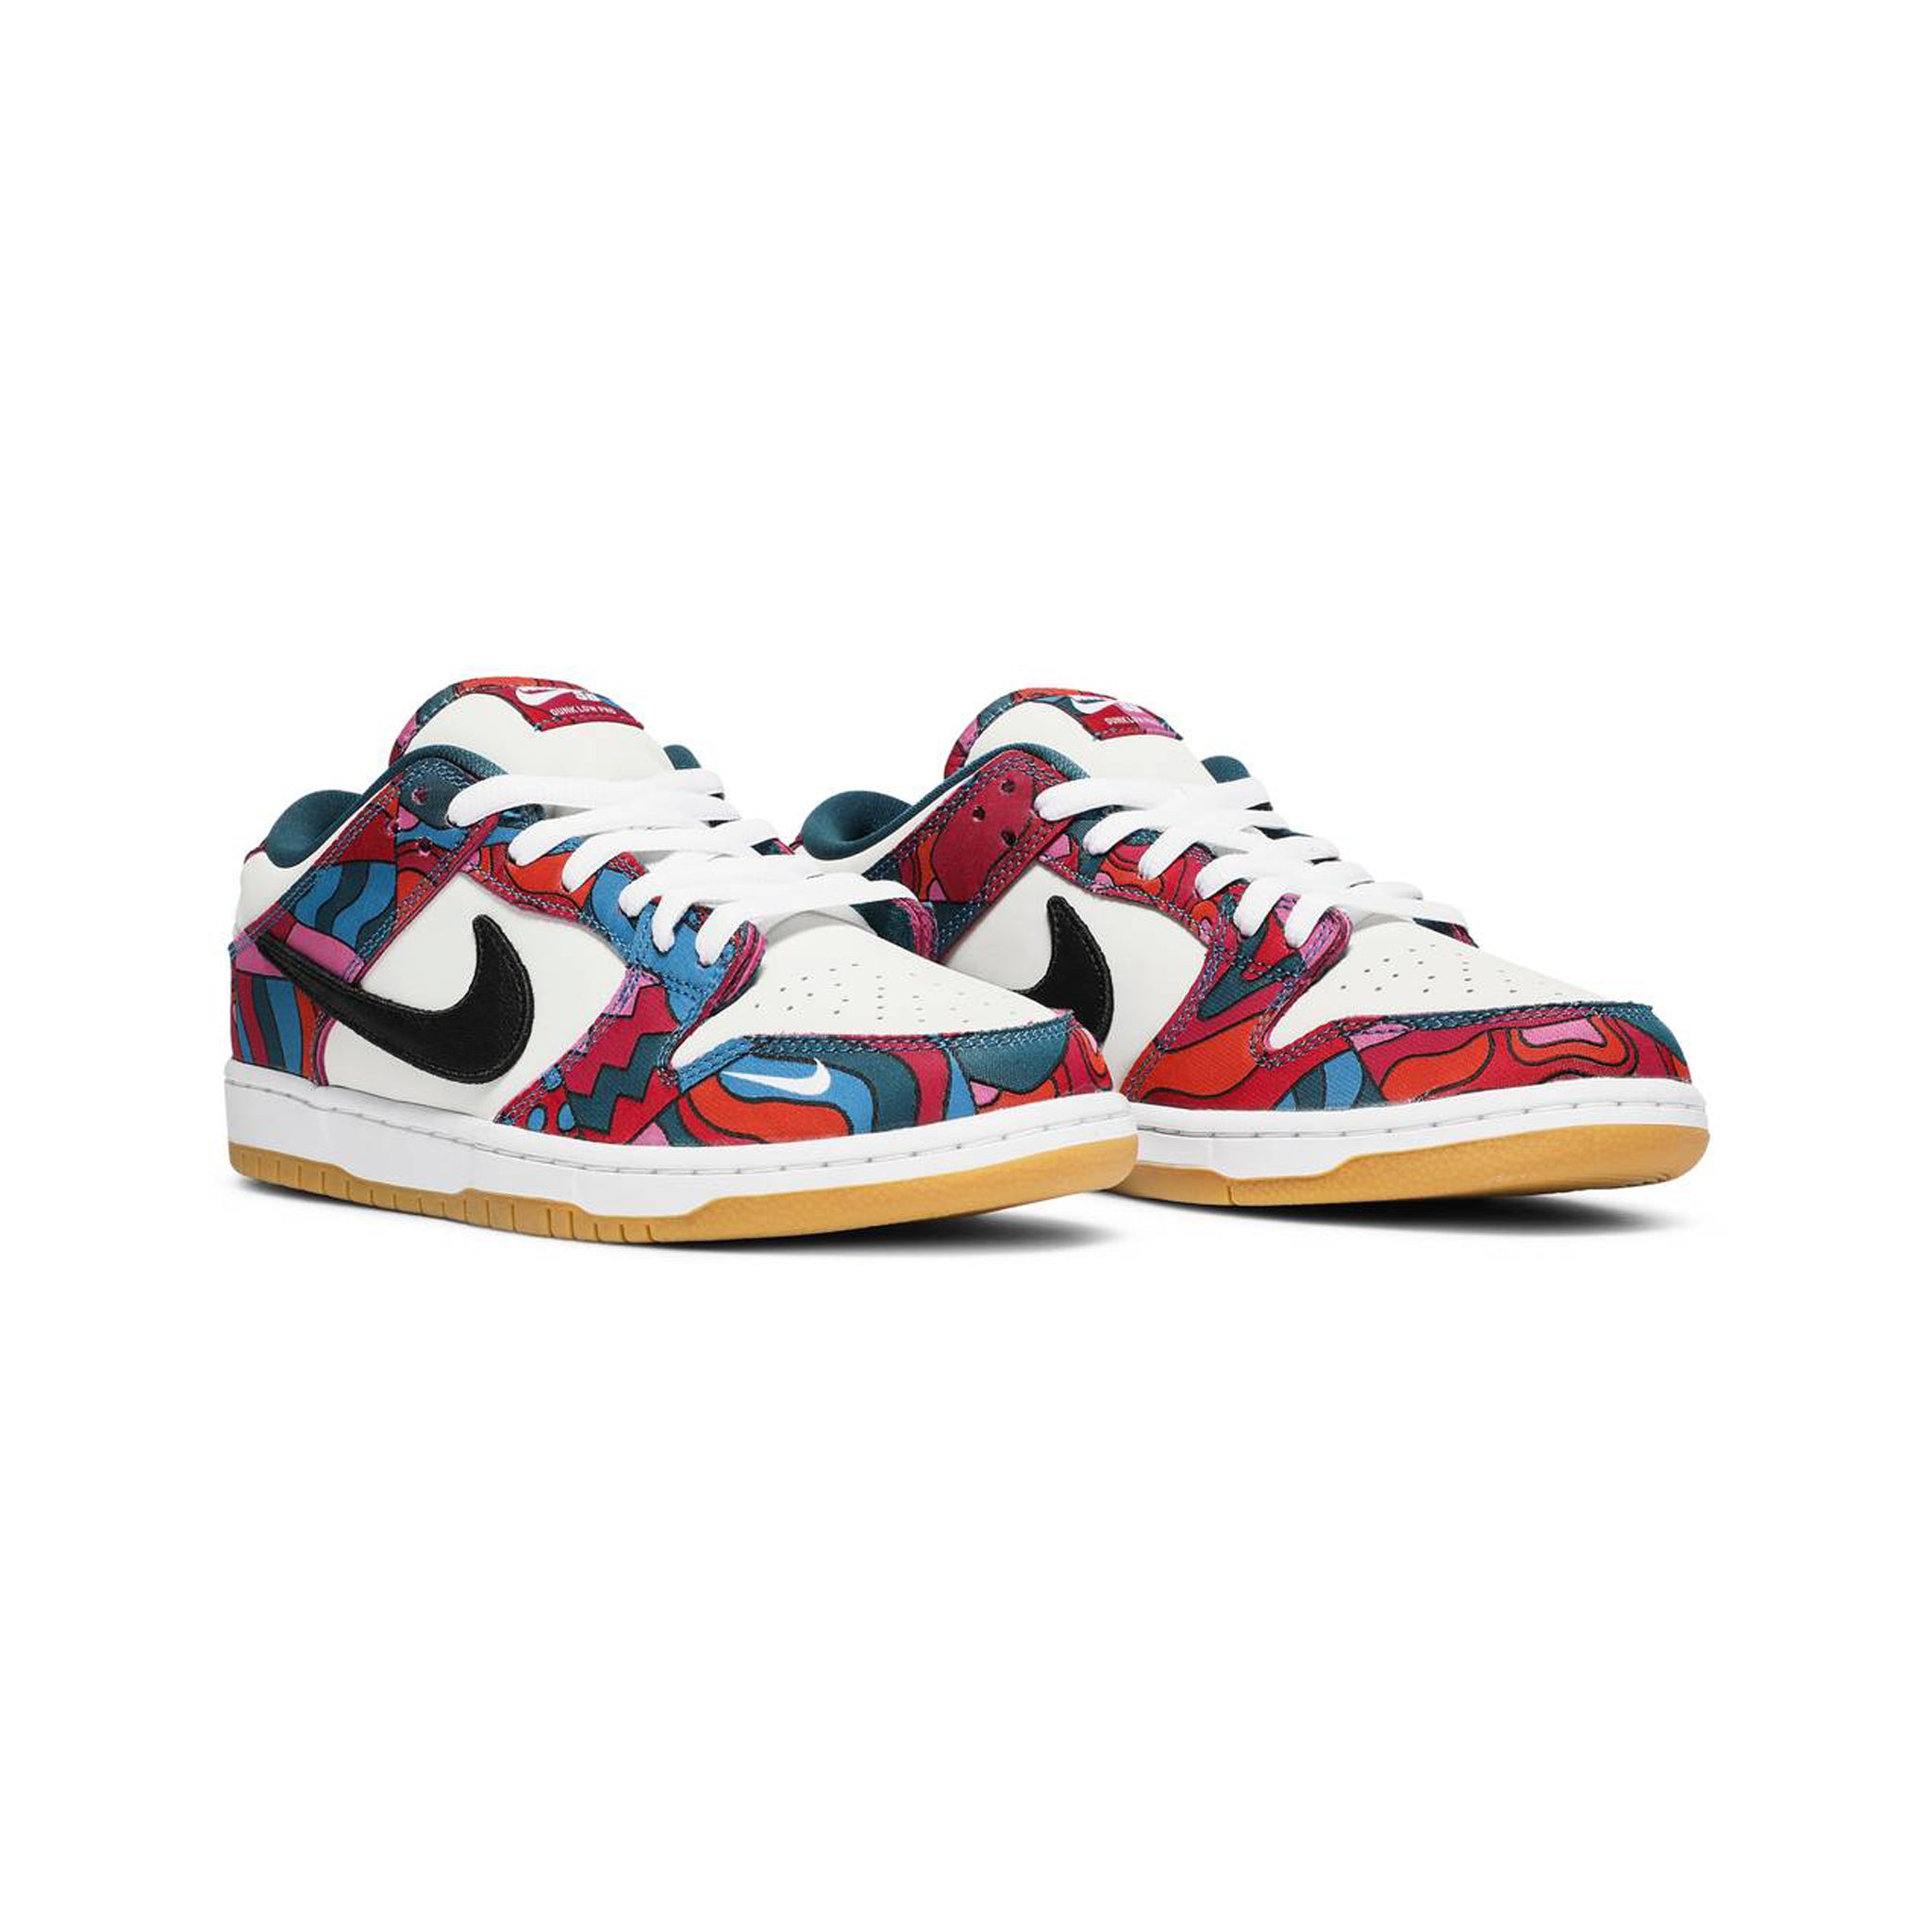 NIKE SB DUNK LOW PRO PARRA ABSTRACT ART (2021)